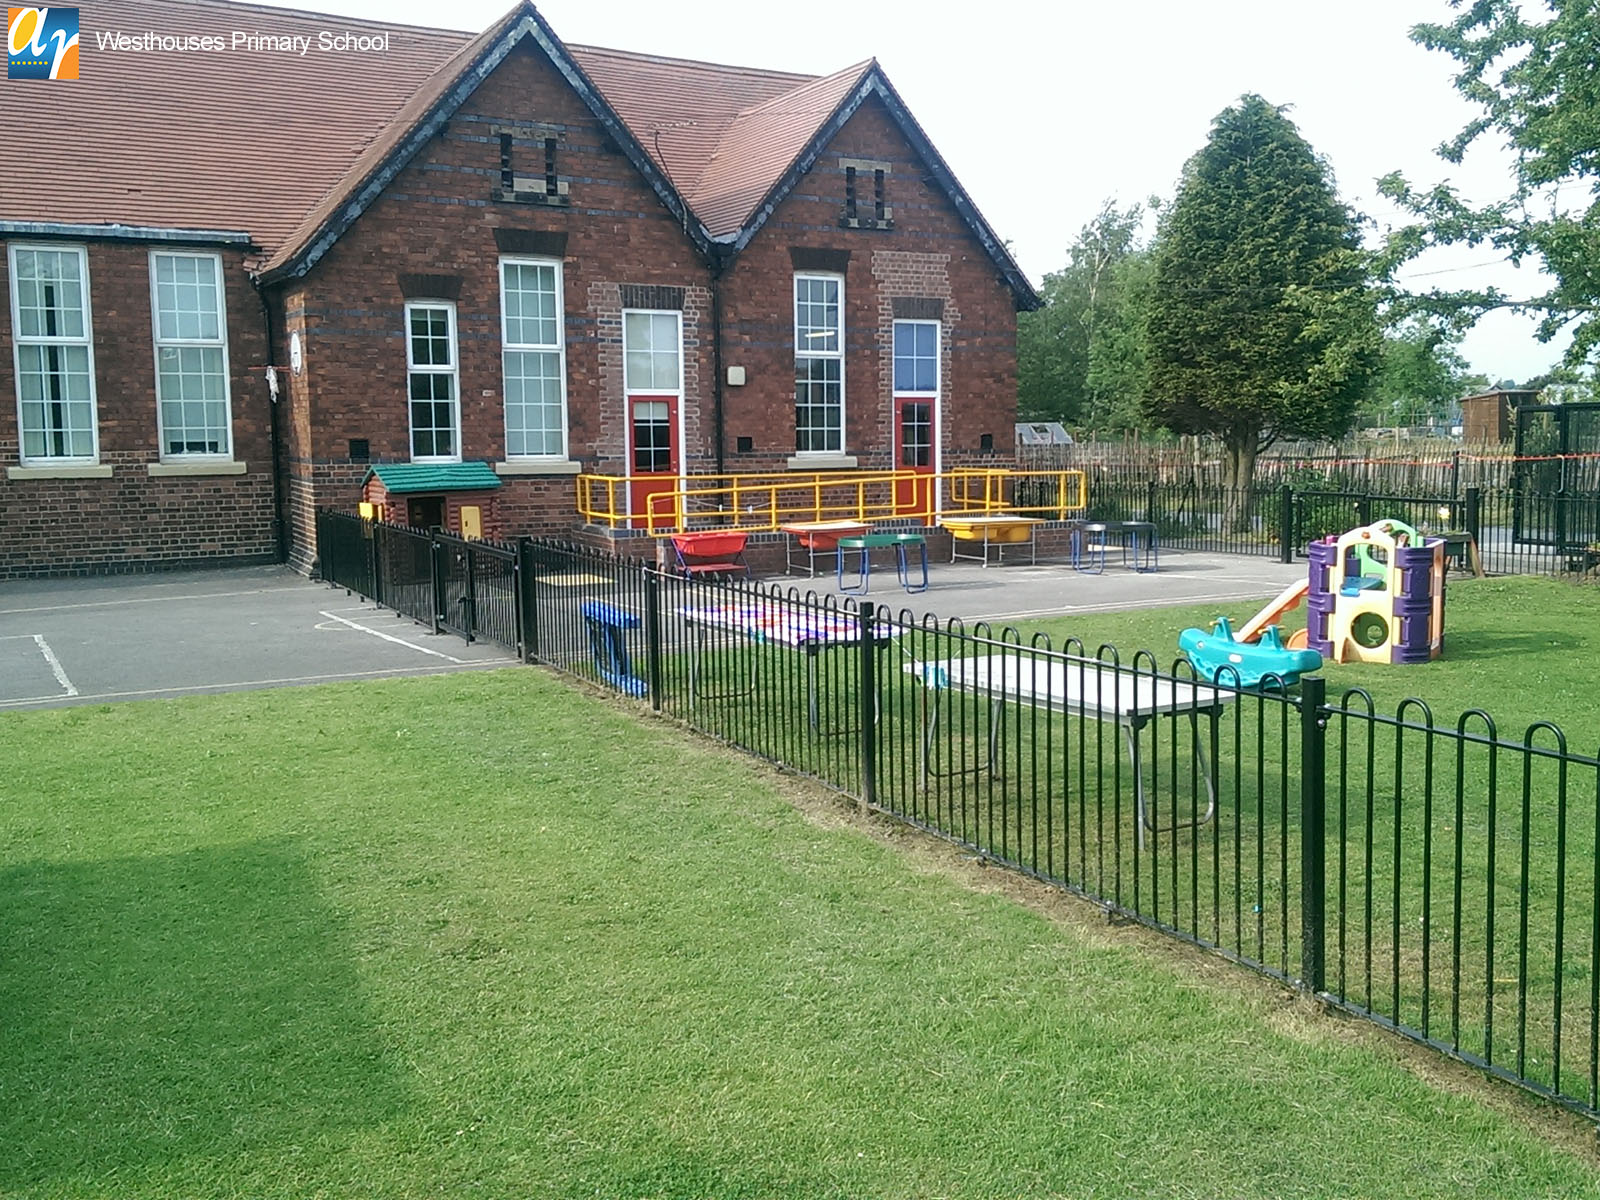 Westhouses Primary School Playspec bow top railings